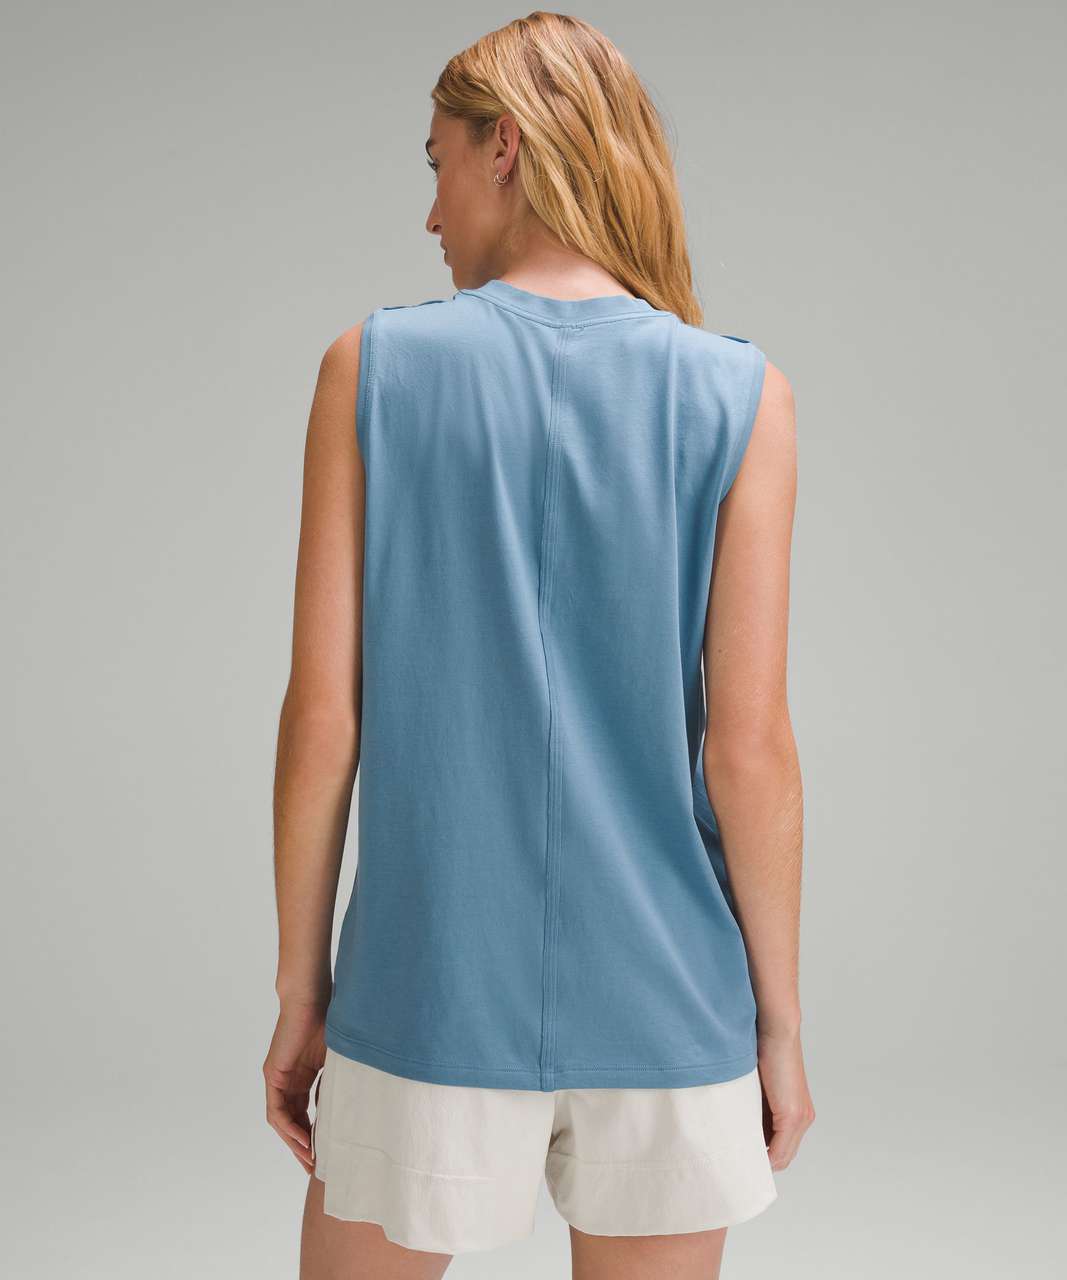 Lululemon All Yours Tank Top - Utility Blue